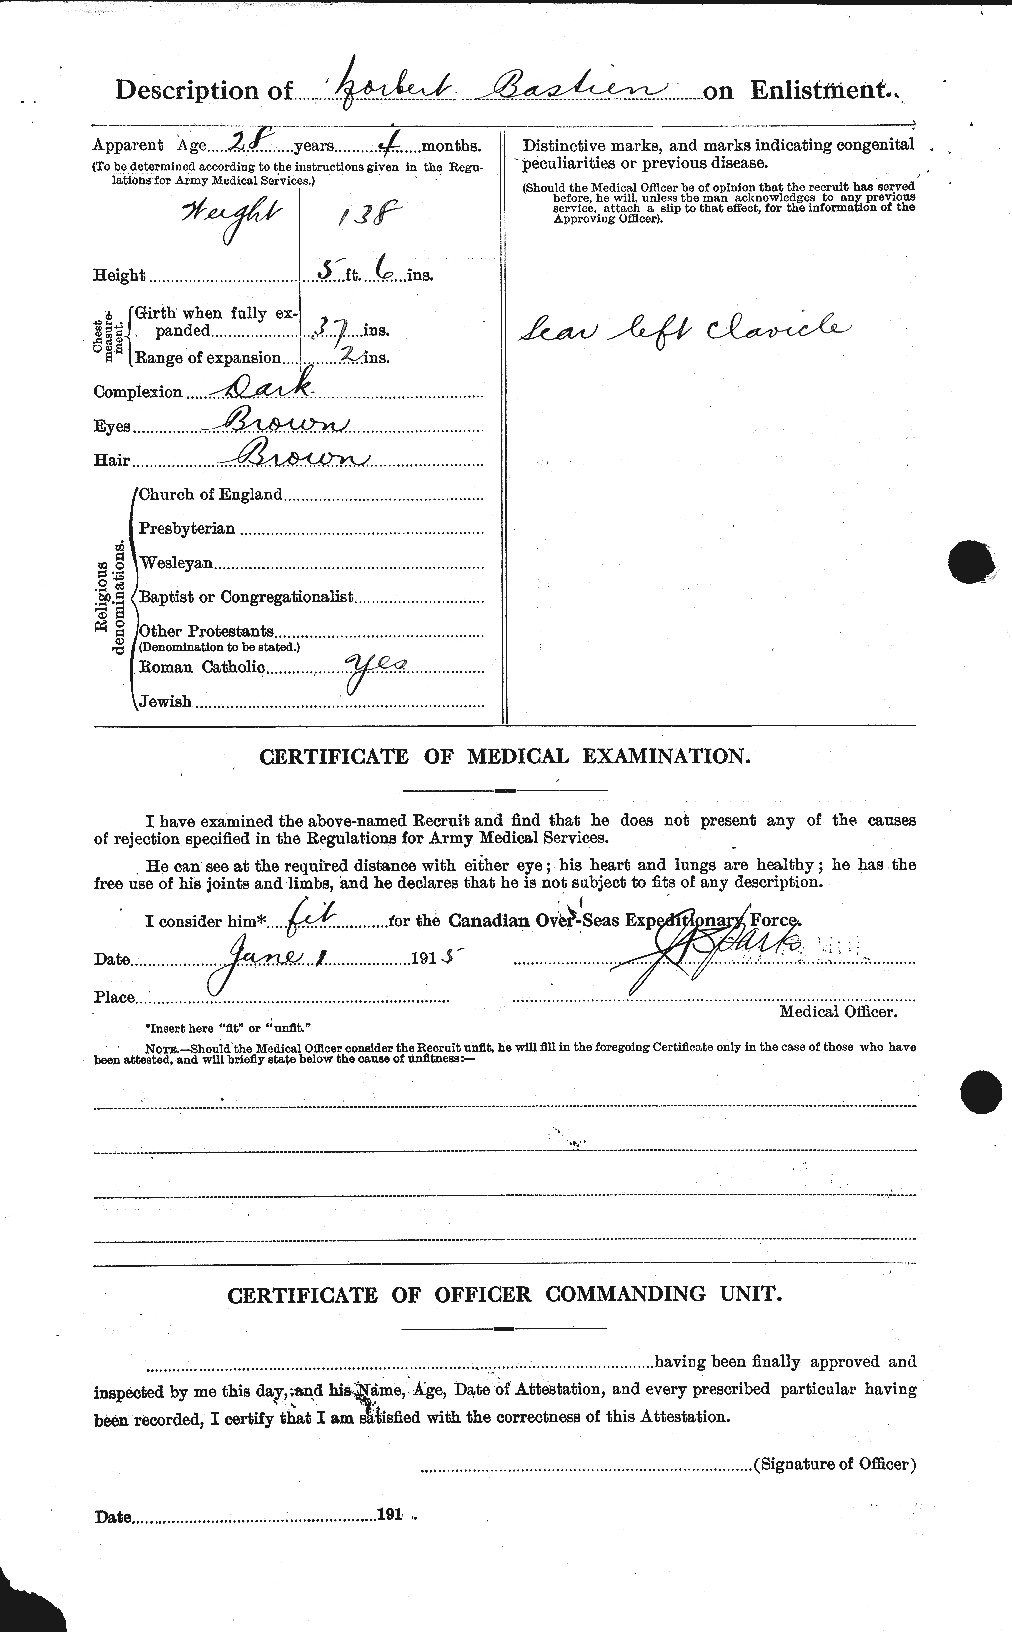 Personnel Records of the First World War - CEF 228226b